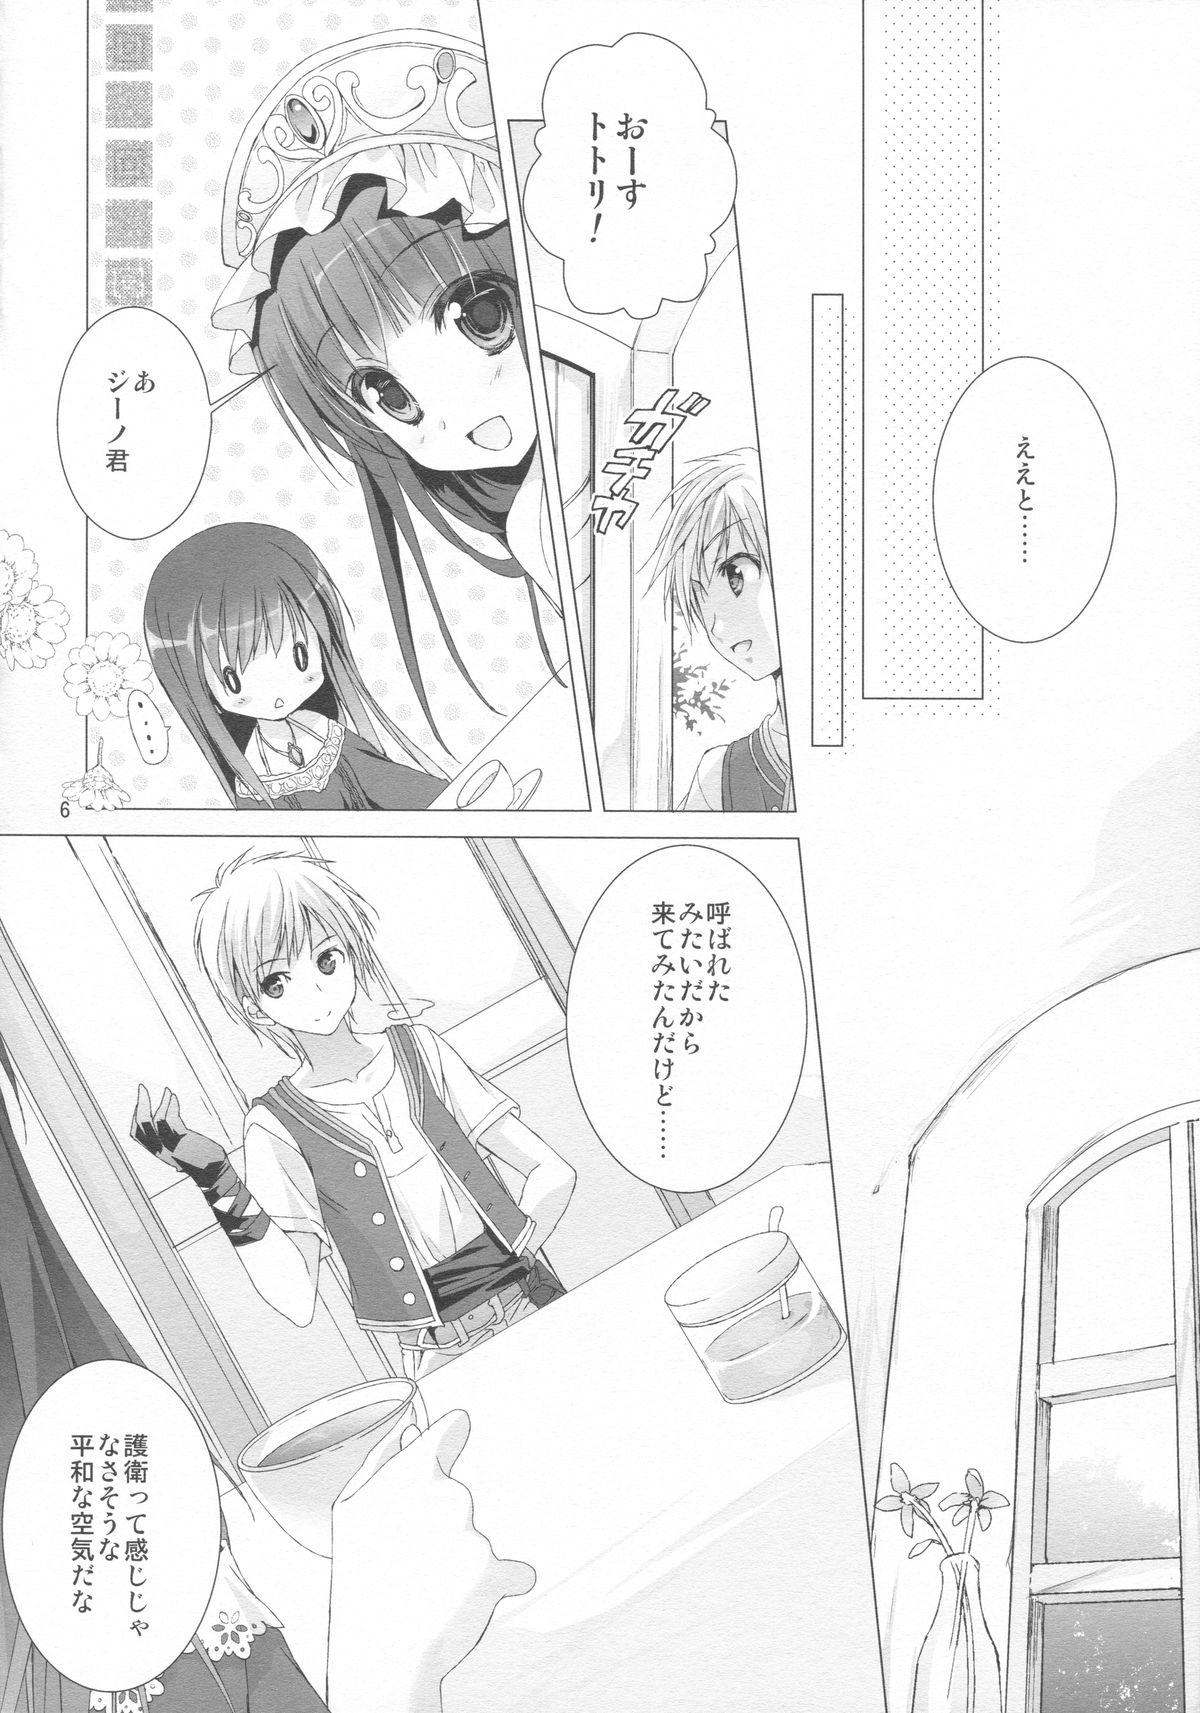 Blows 2-Shuume no True End - Atelier totori Monstercock - Page 4